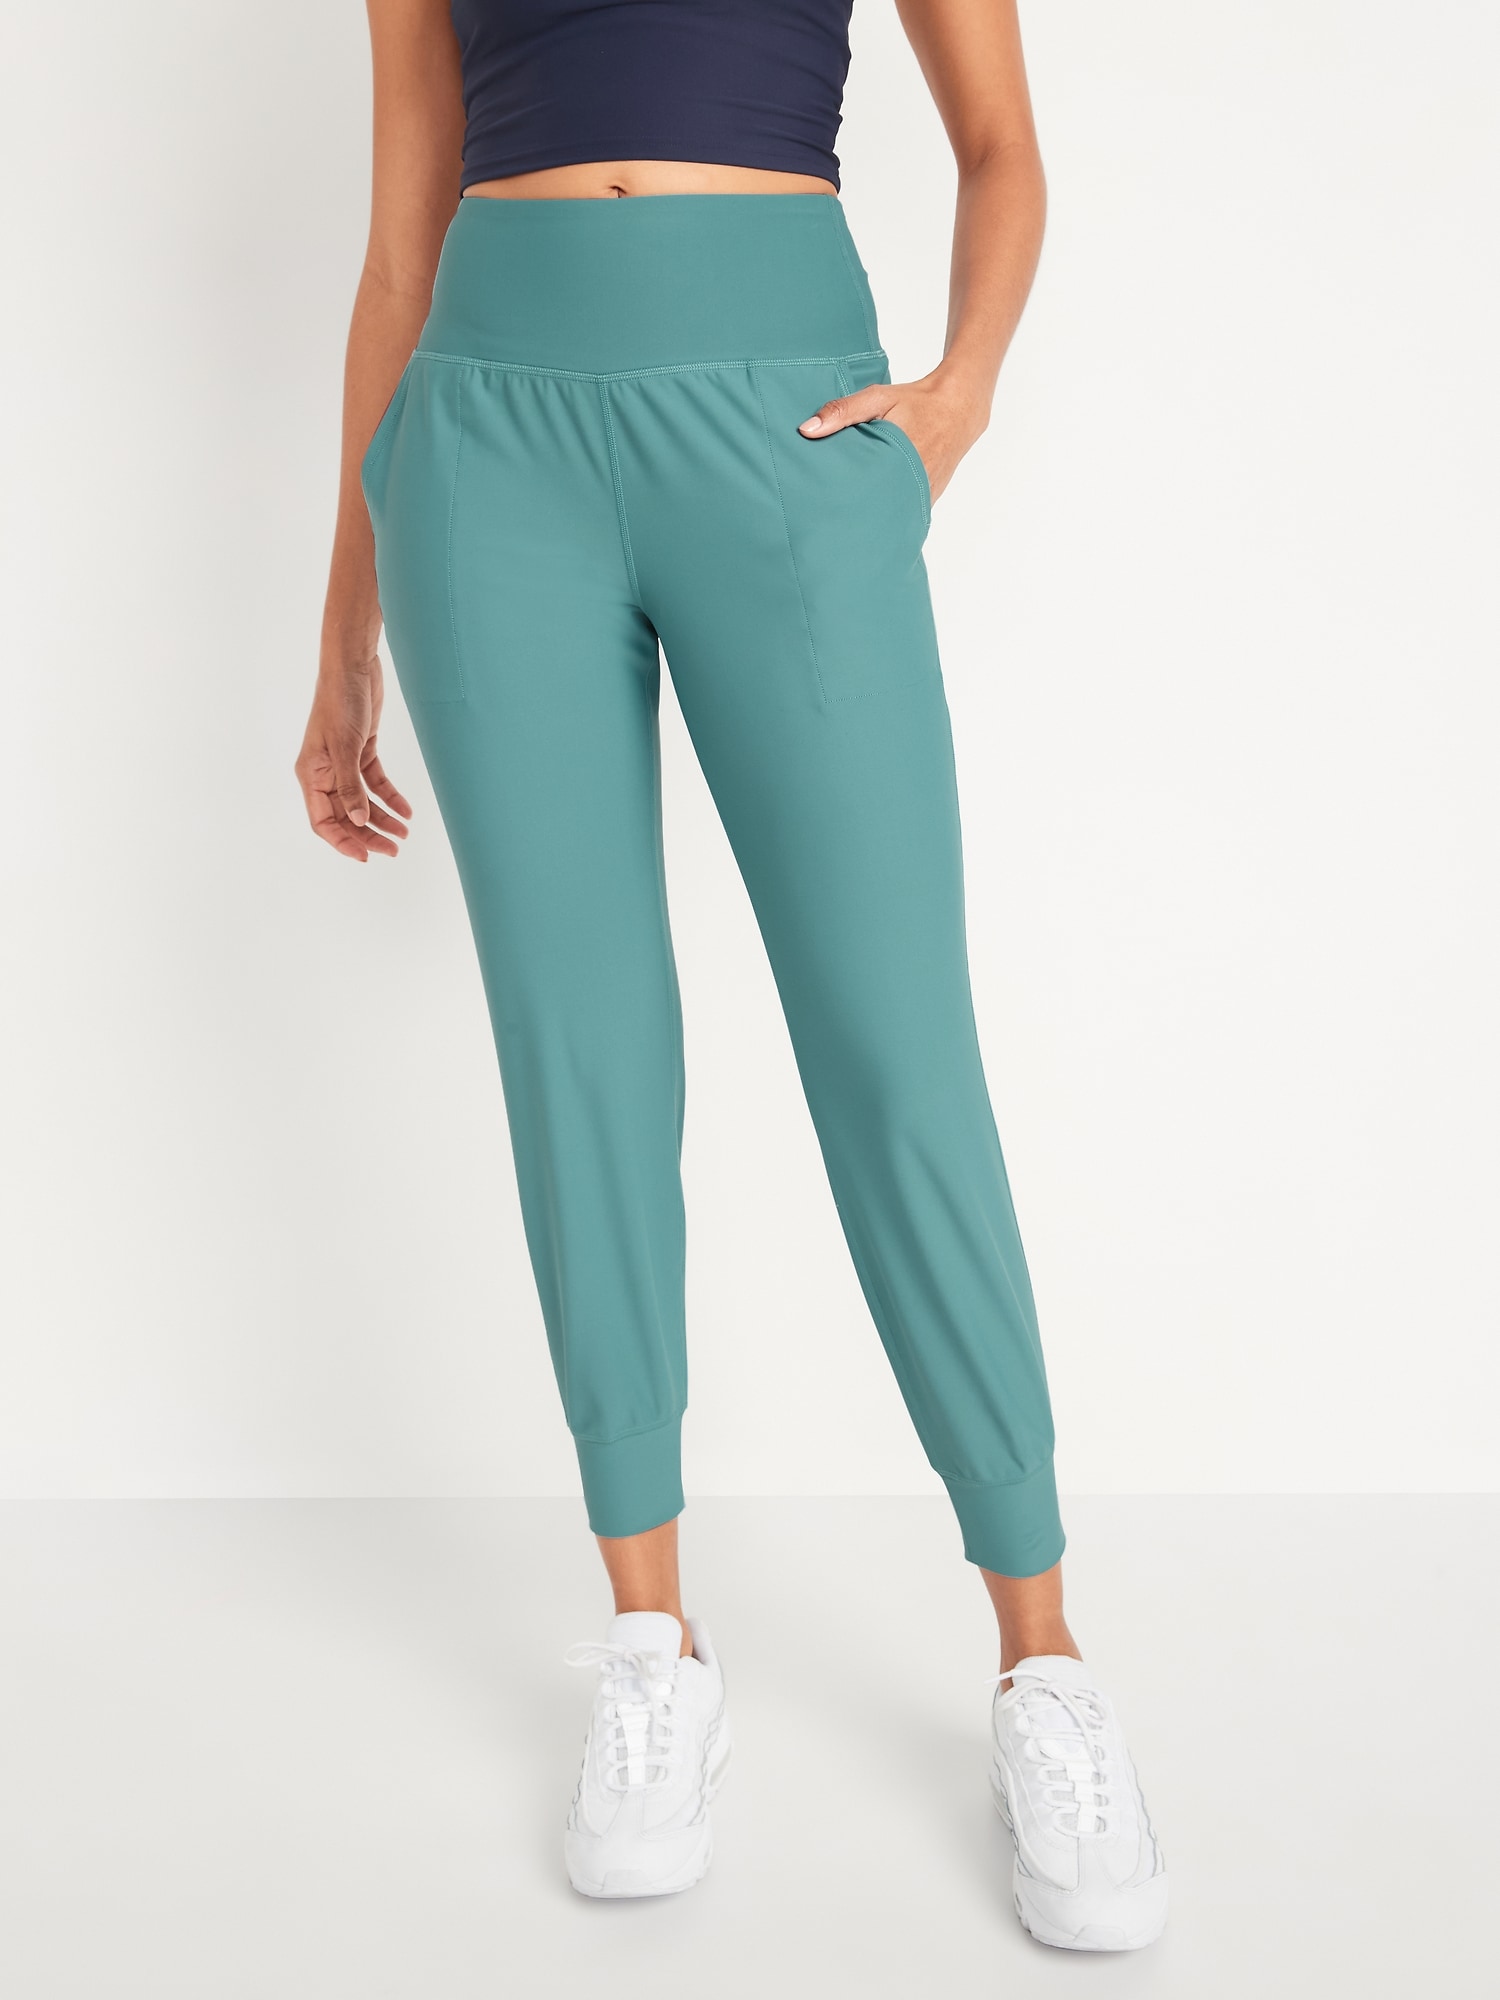 NWT Old Navy High-Rise High-Waisted PowerSoft 7/8-Length Joggers